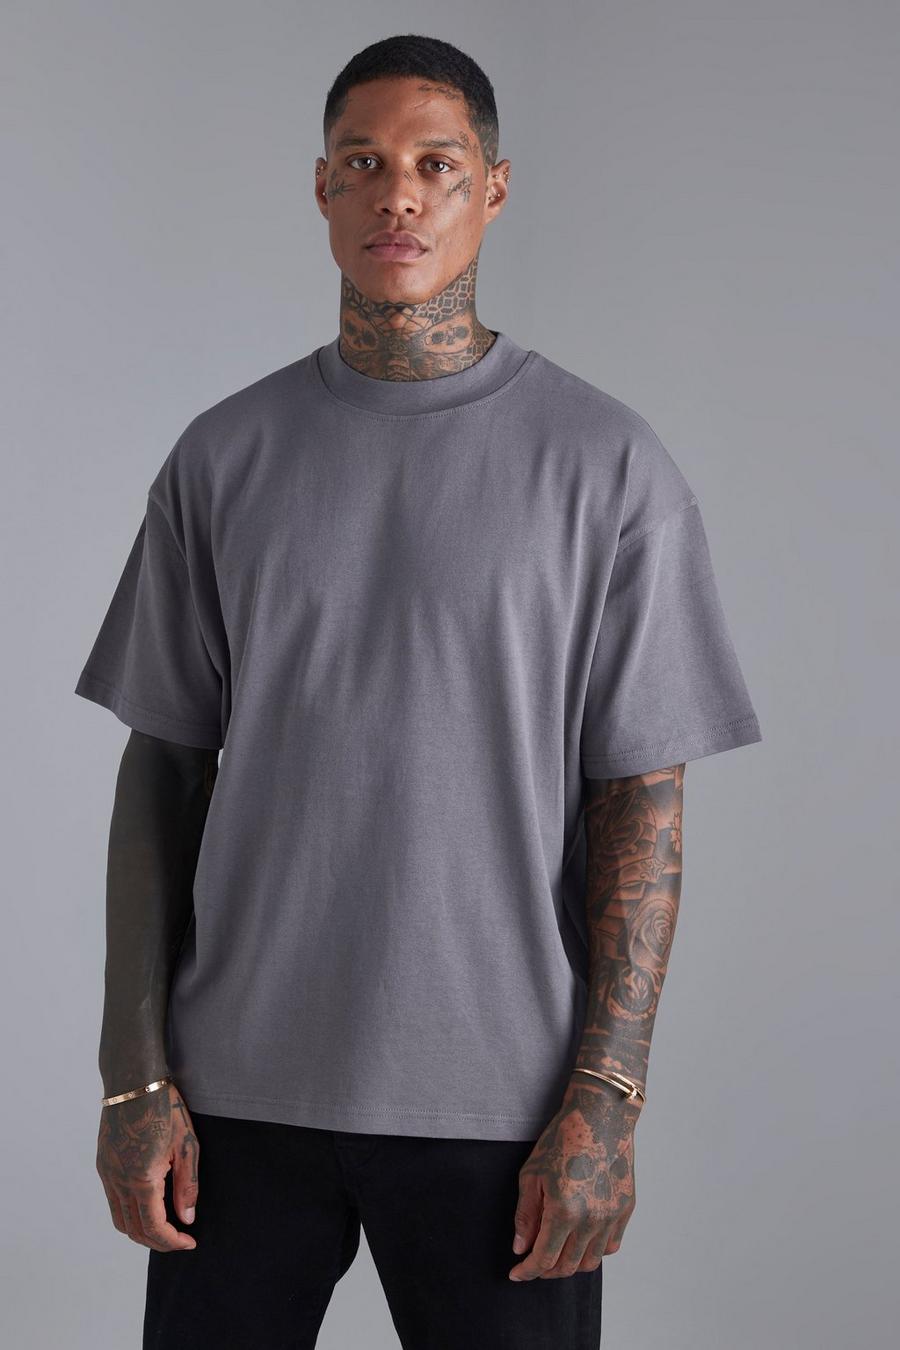 Charcoal grey Oversized Extended Neck Heavy T-shirt